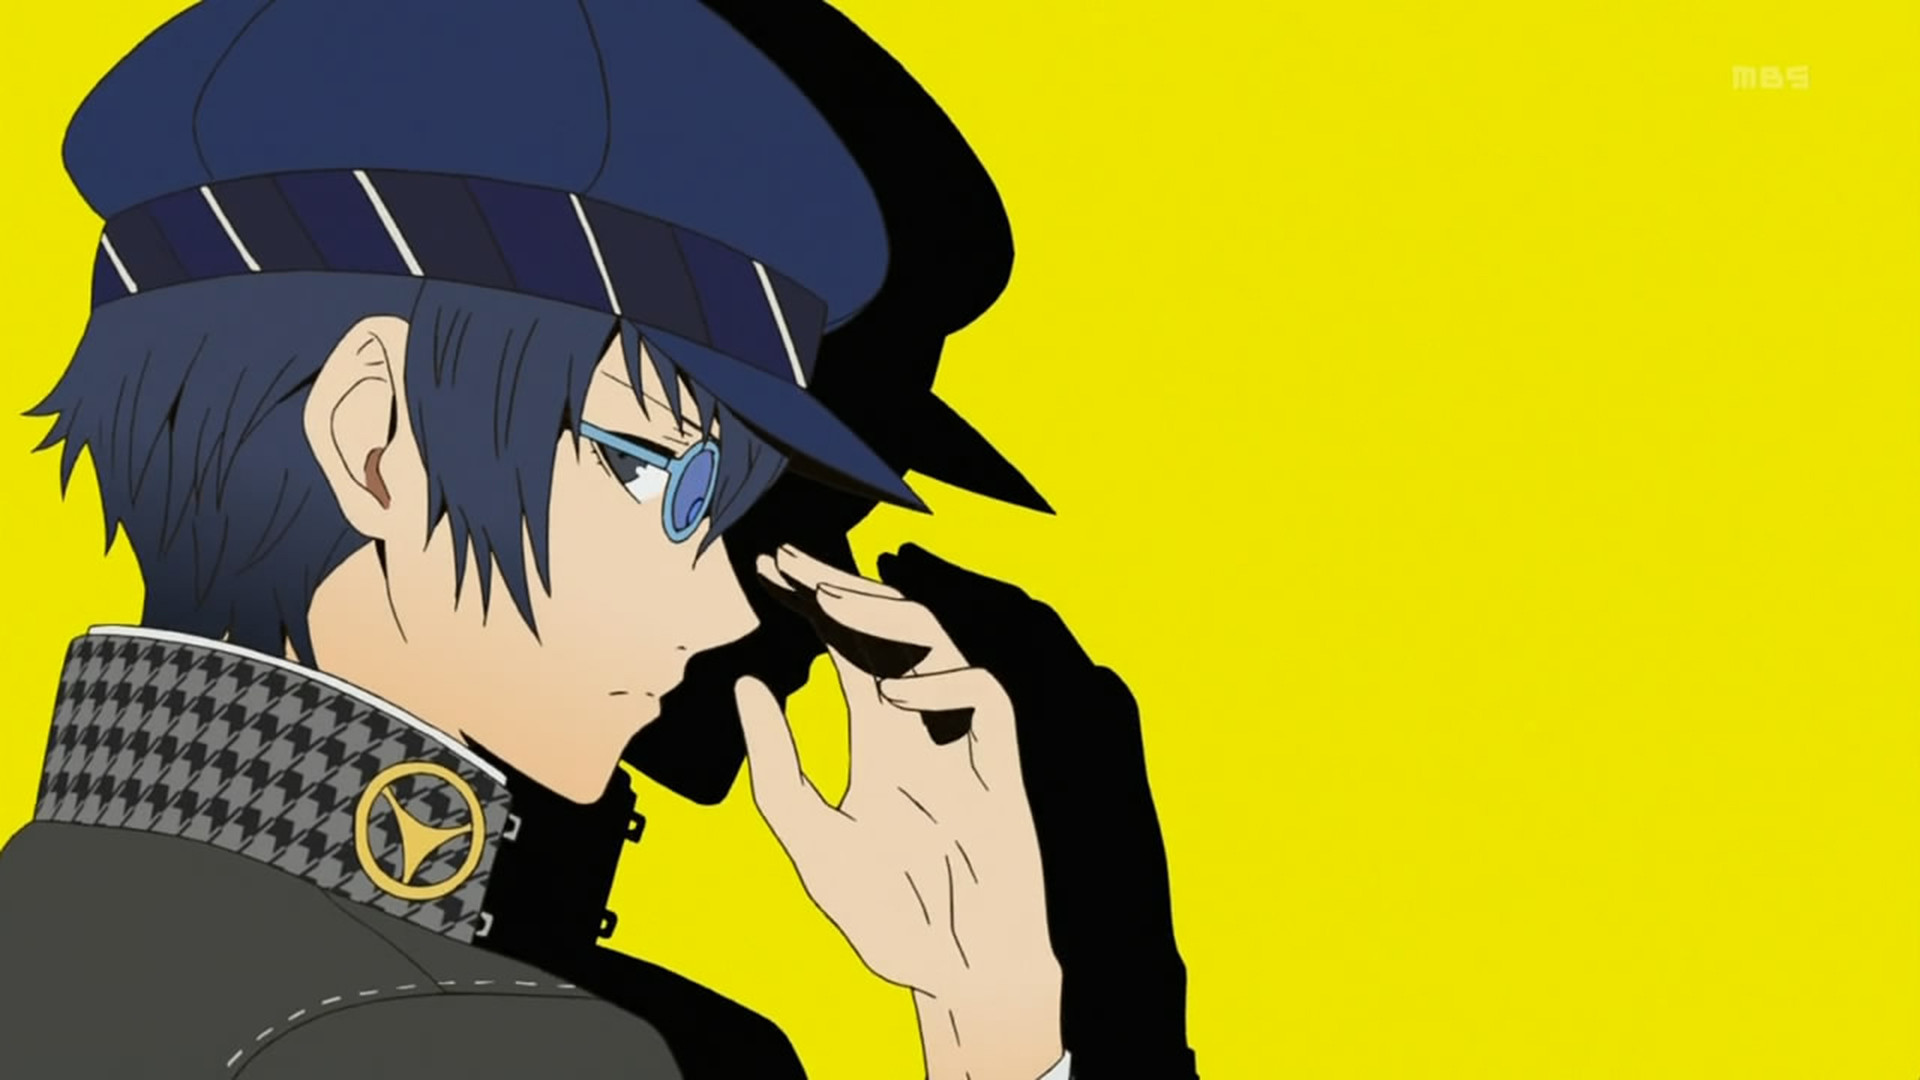 1920x1080 ... Persona 4 anime has some good wallpaper worthy stills of the eight main  characters in it. These are saved straight from the video, properly named,  ...